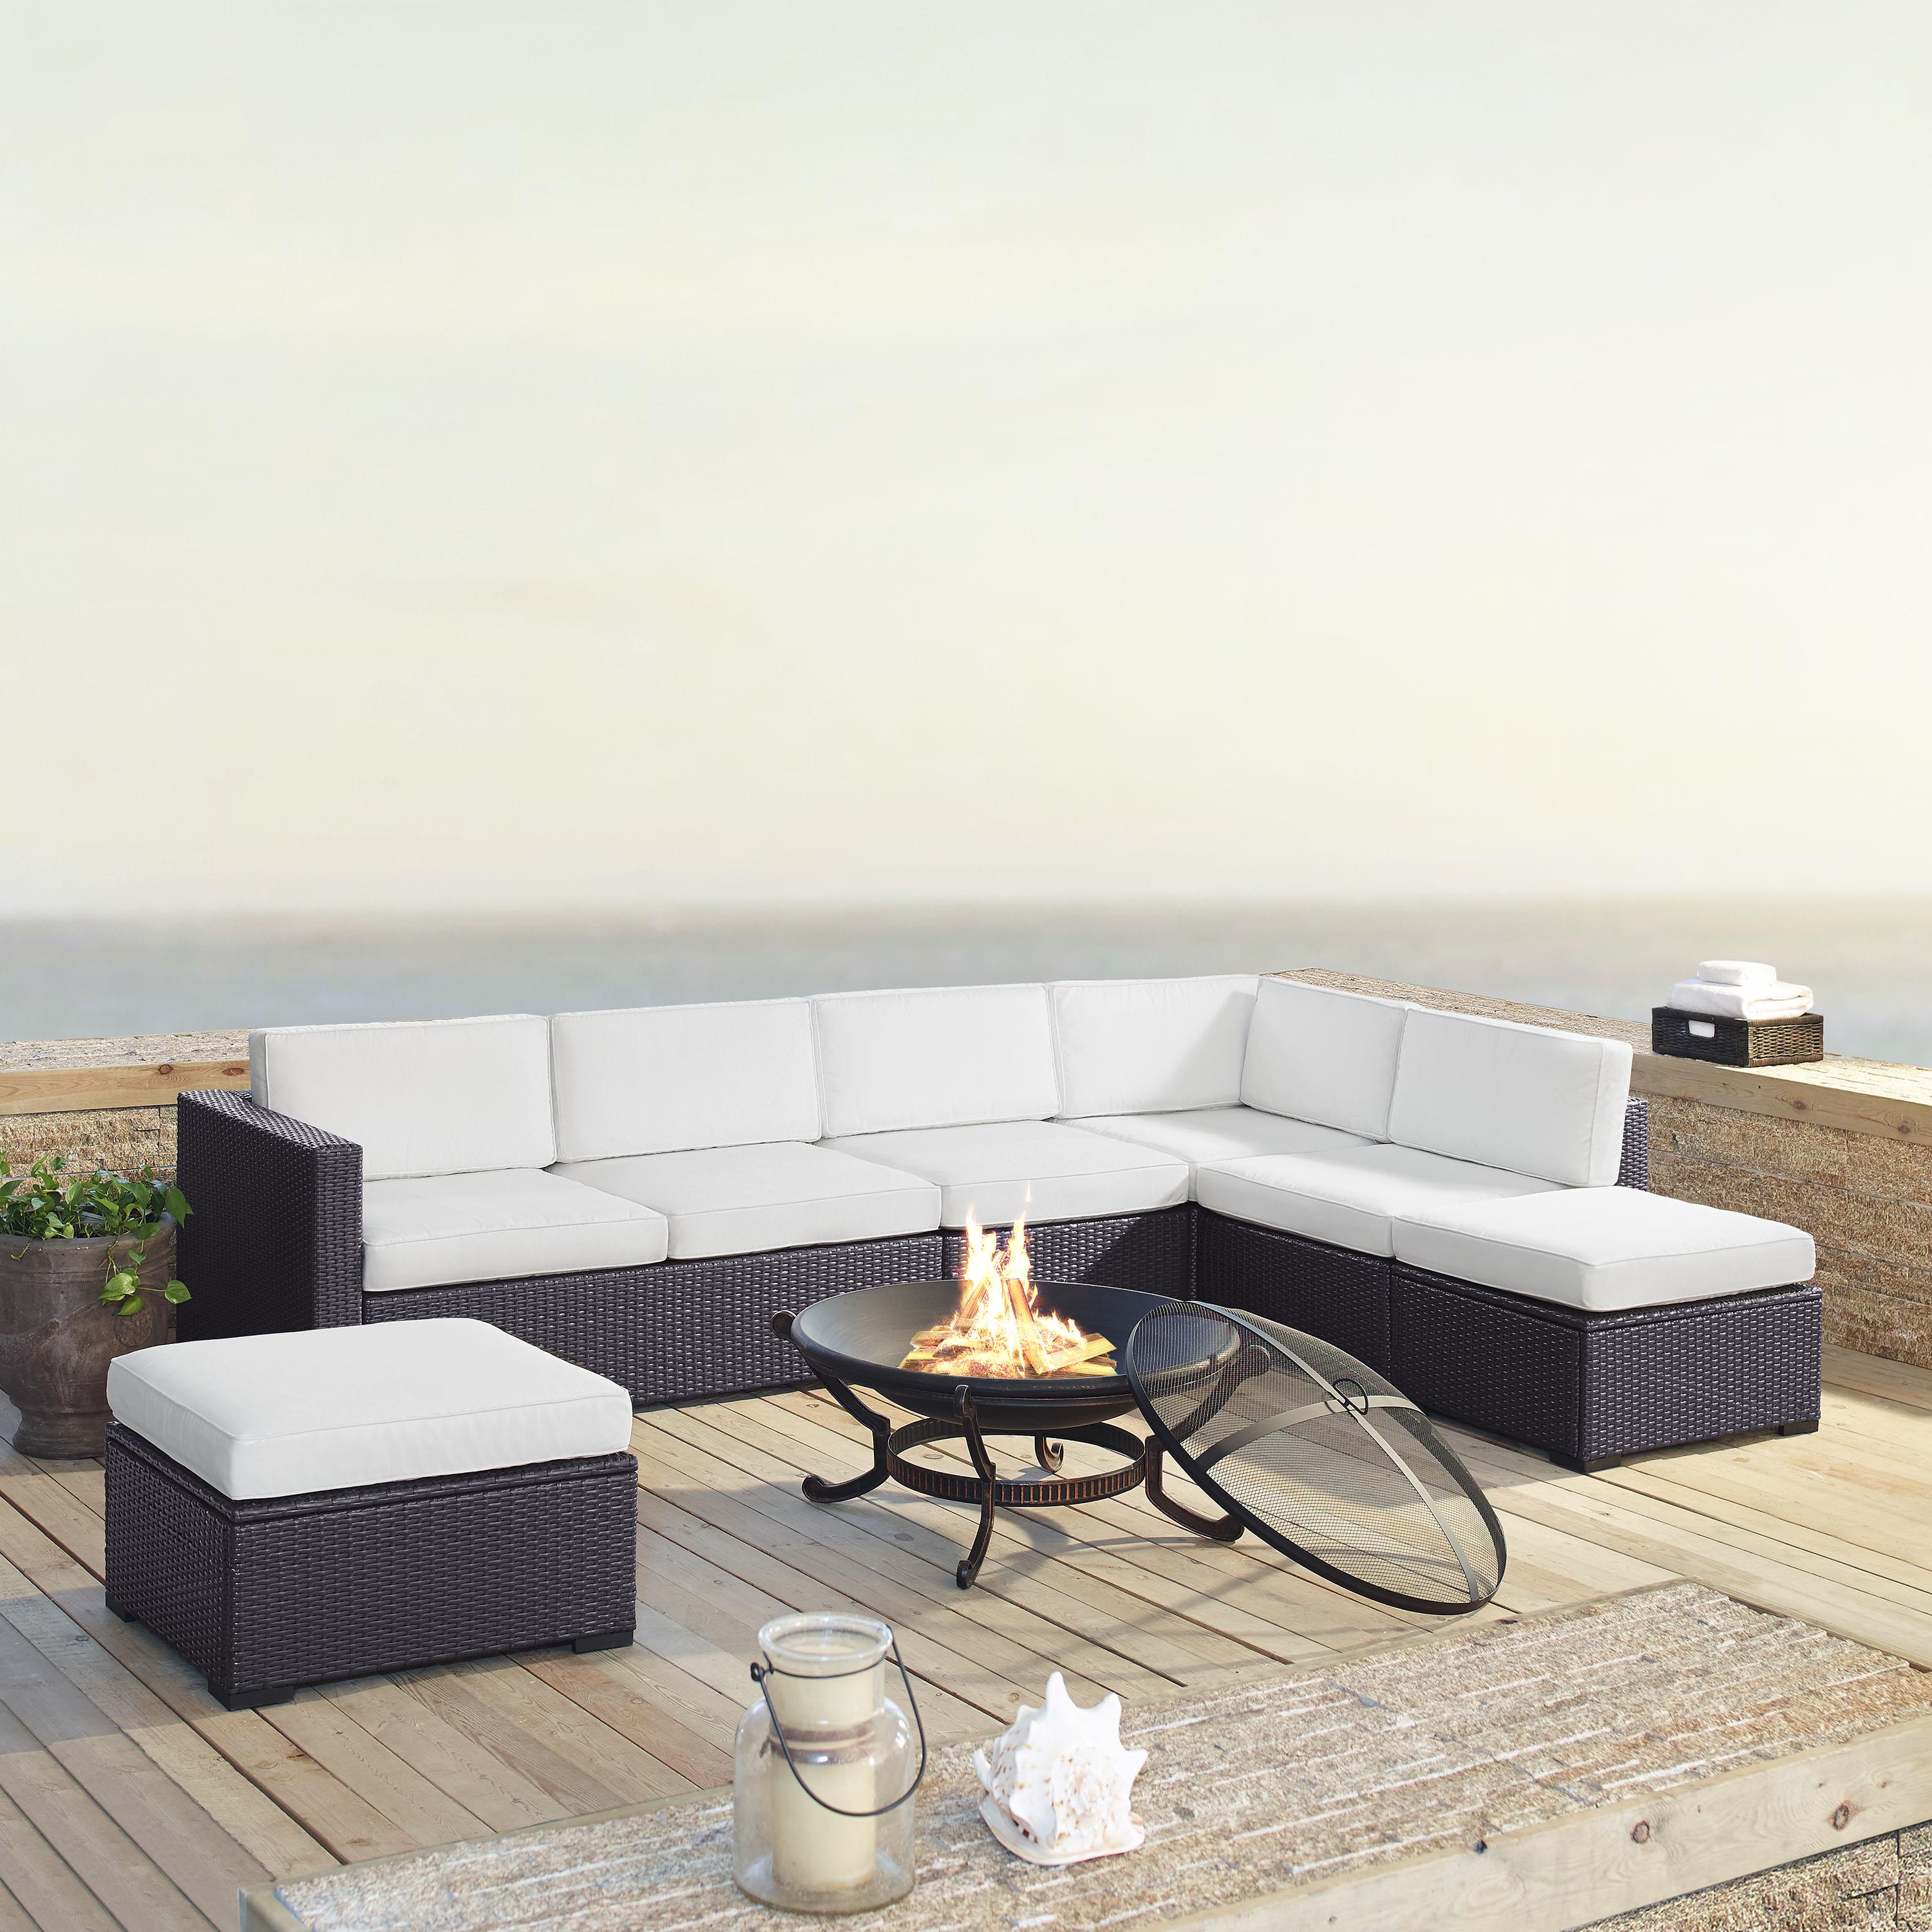 Crosley Furniture Biscayne 6 Piece Wicker Outdoor Sectional Set with Firepit - image 2 of 4